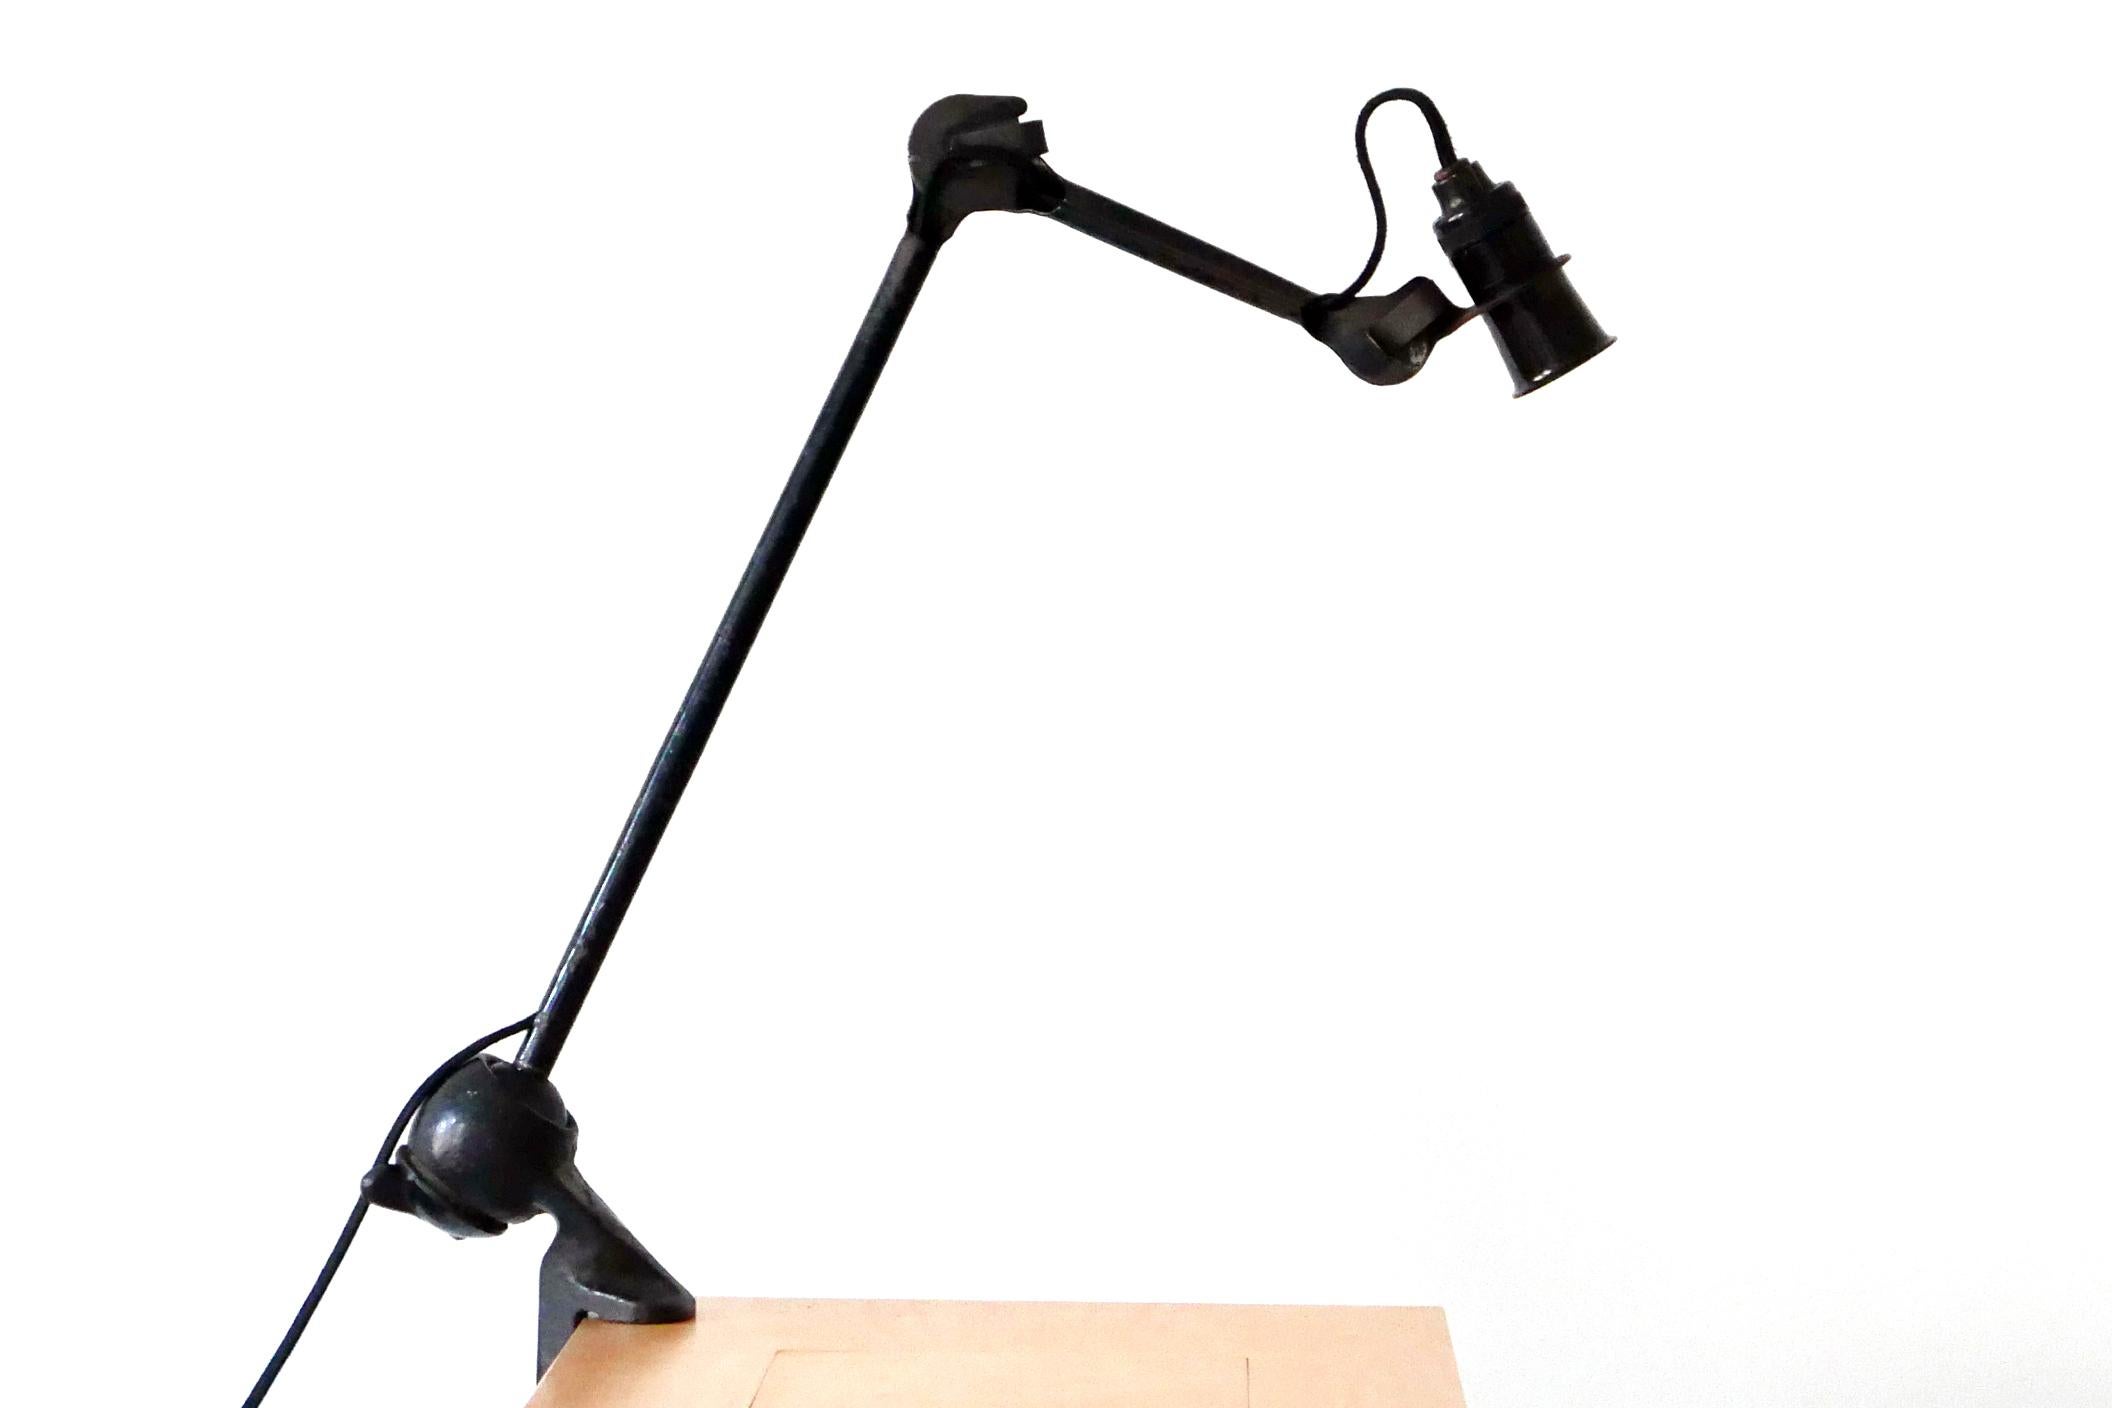 Articulated modernist task lamp or clamp table light. Extremely rare shorter execution of the model 201. Designed in 1920s by Bernard-Albin Gras. Manufactured in 1920s by Gras, France, 1920s.

Executed in black enameled steel and cast iron, the lamp